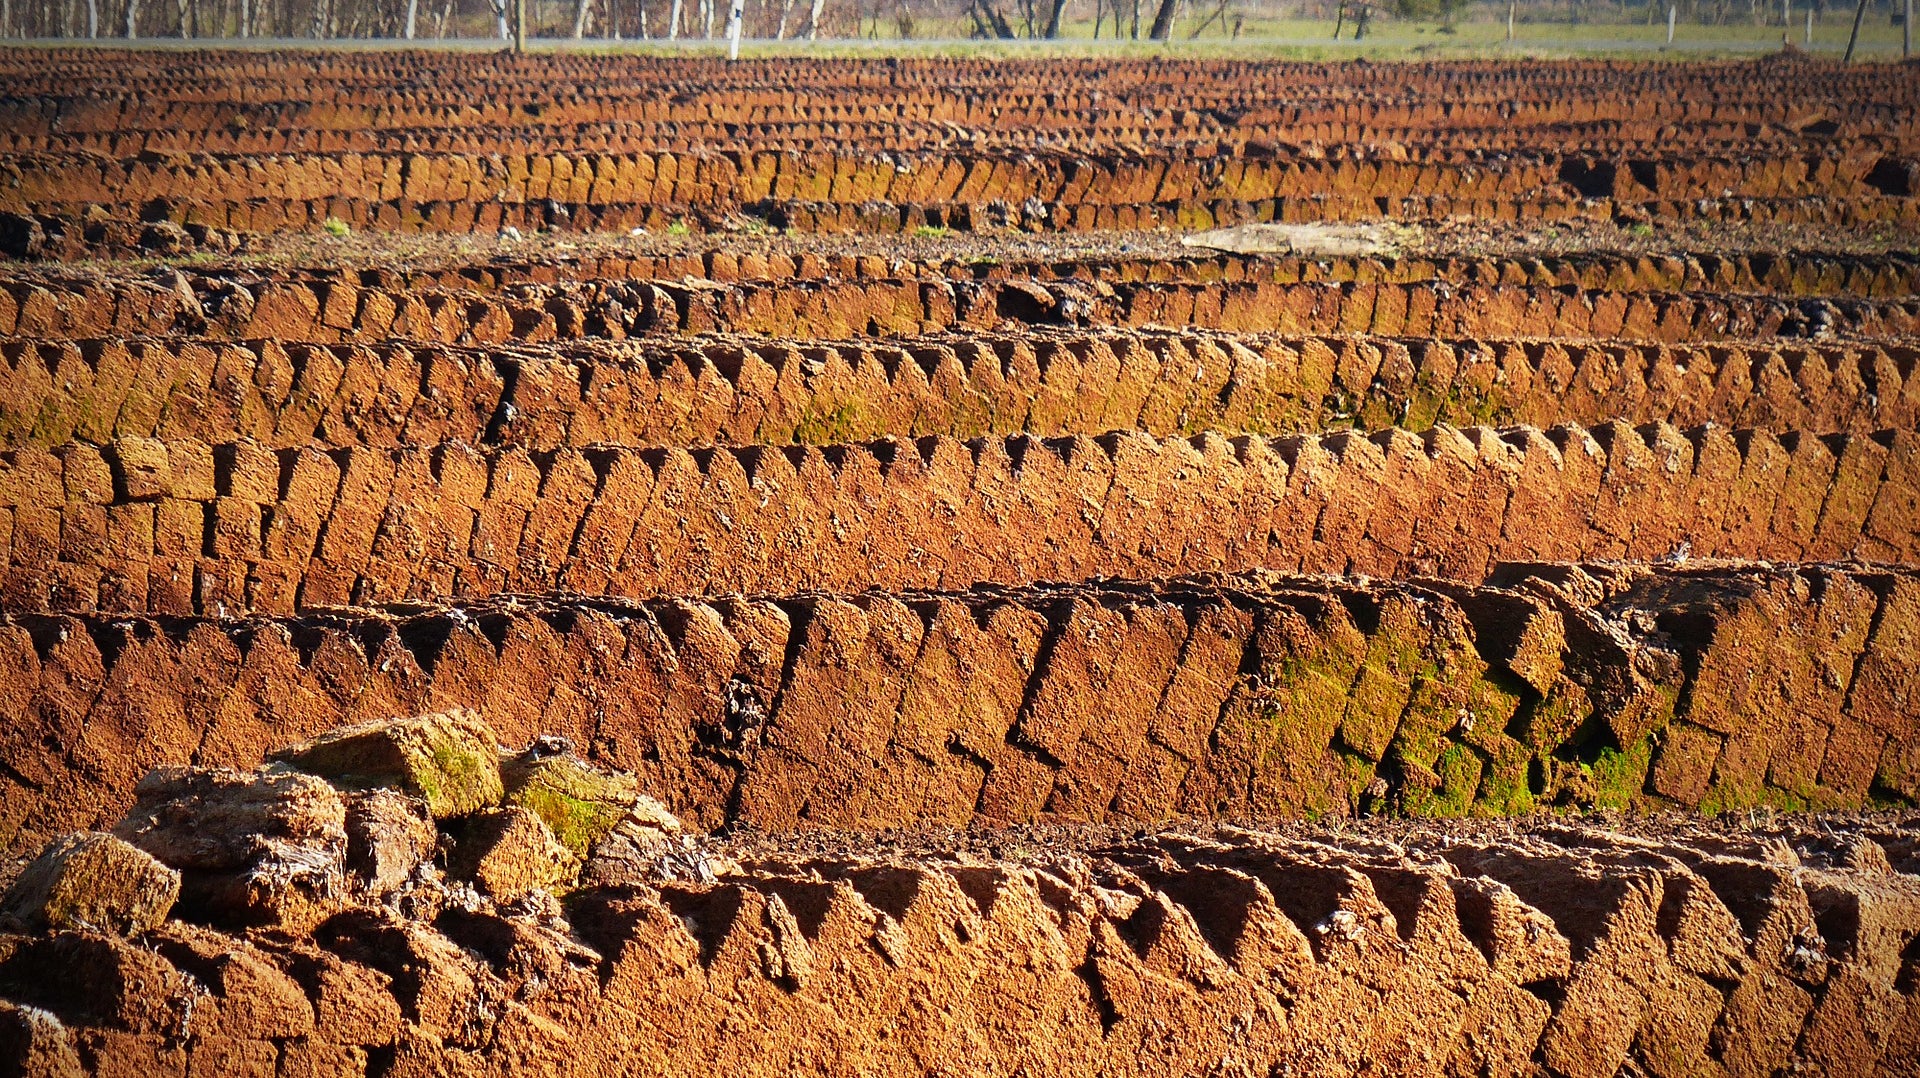 Peat cutting before the ban on peat